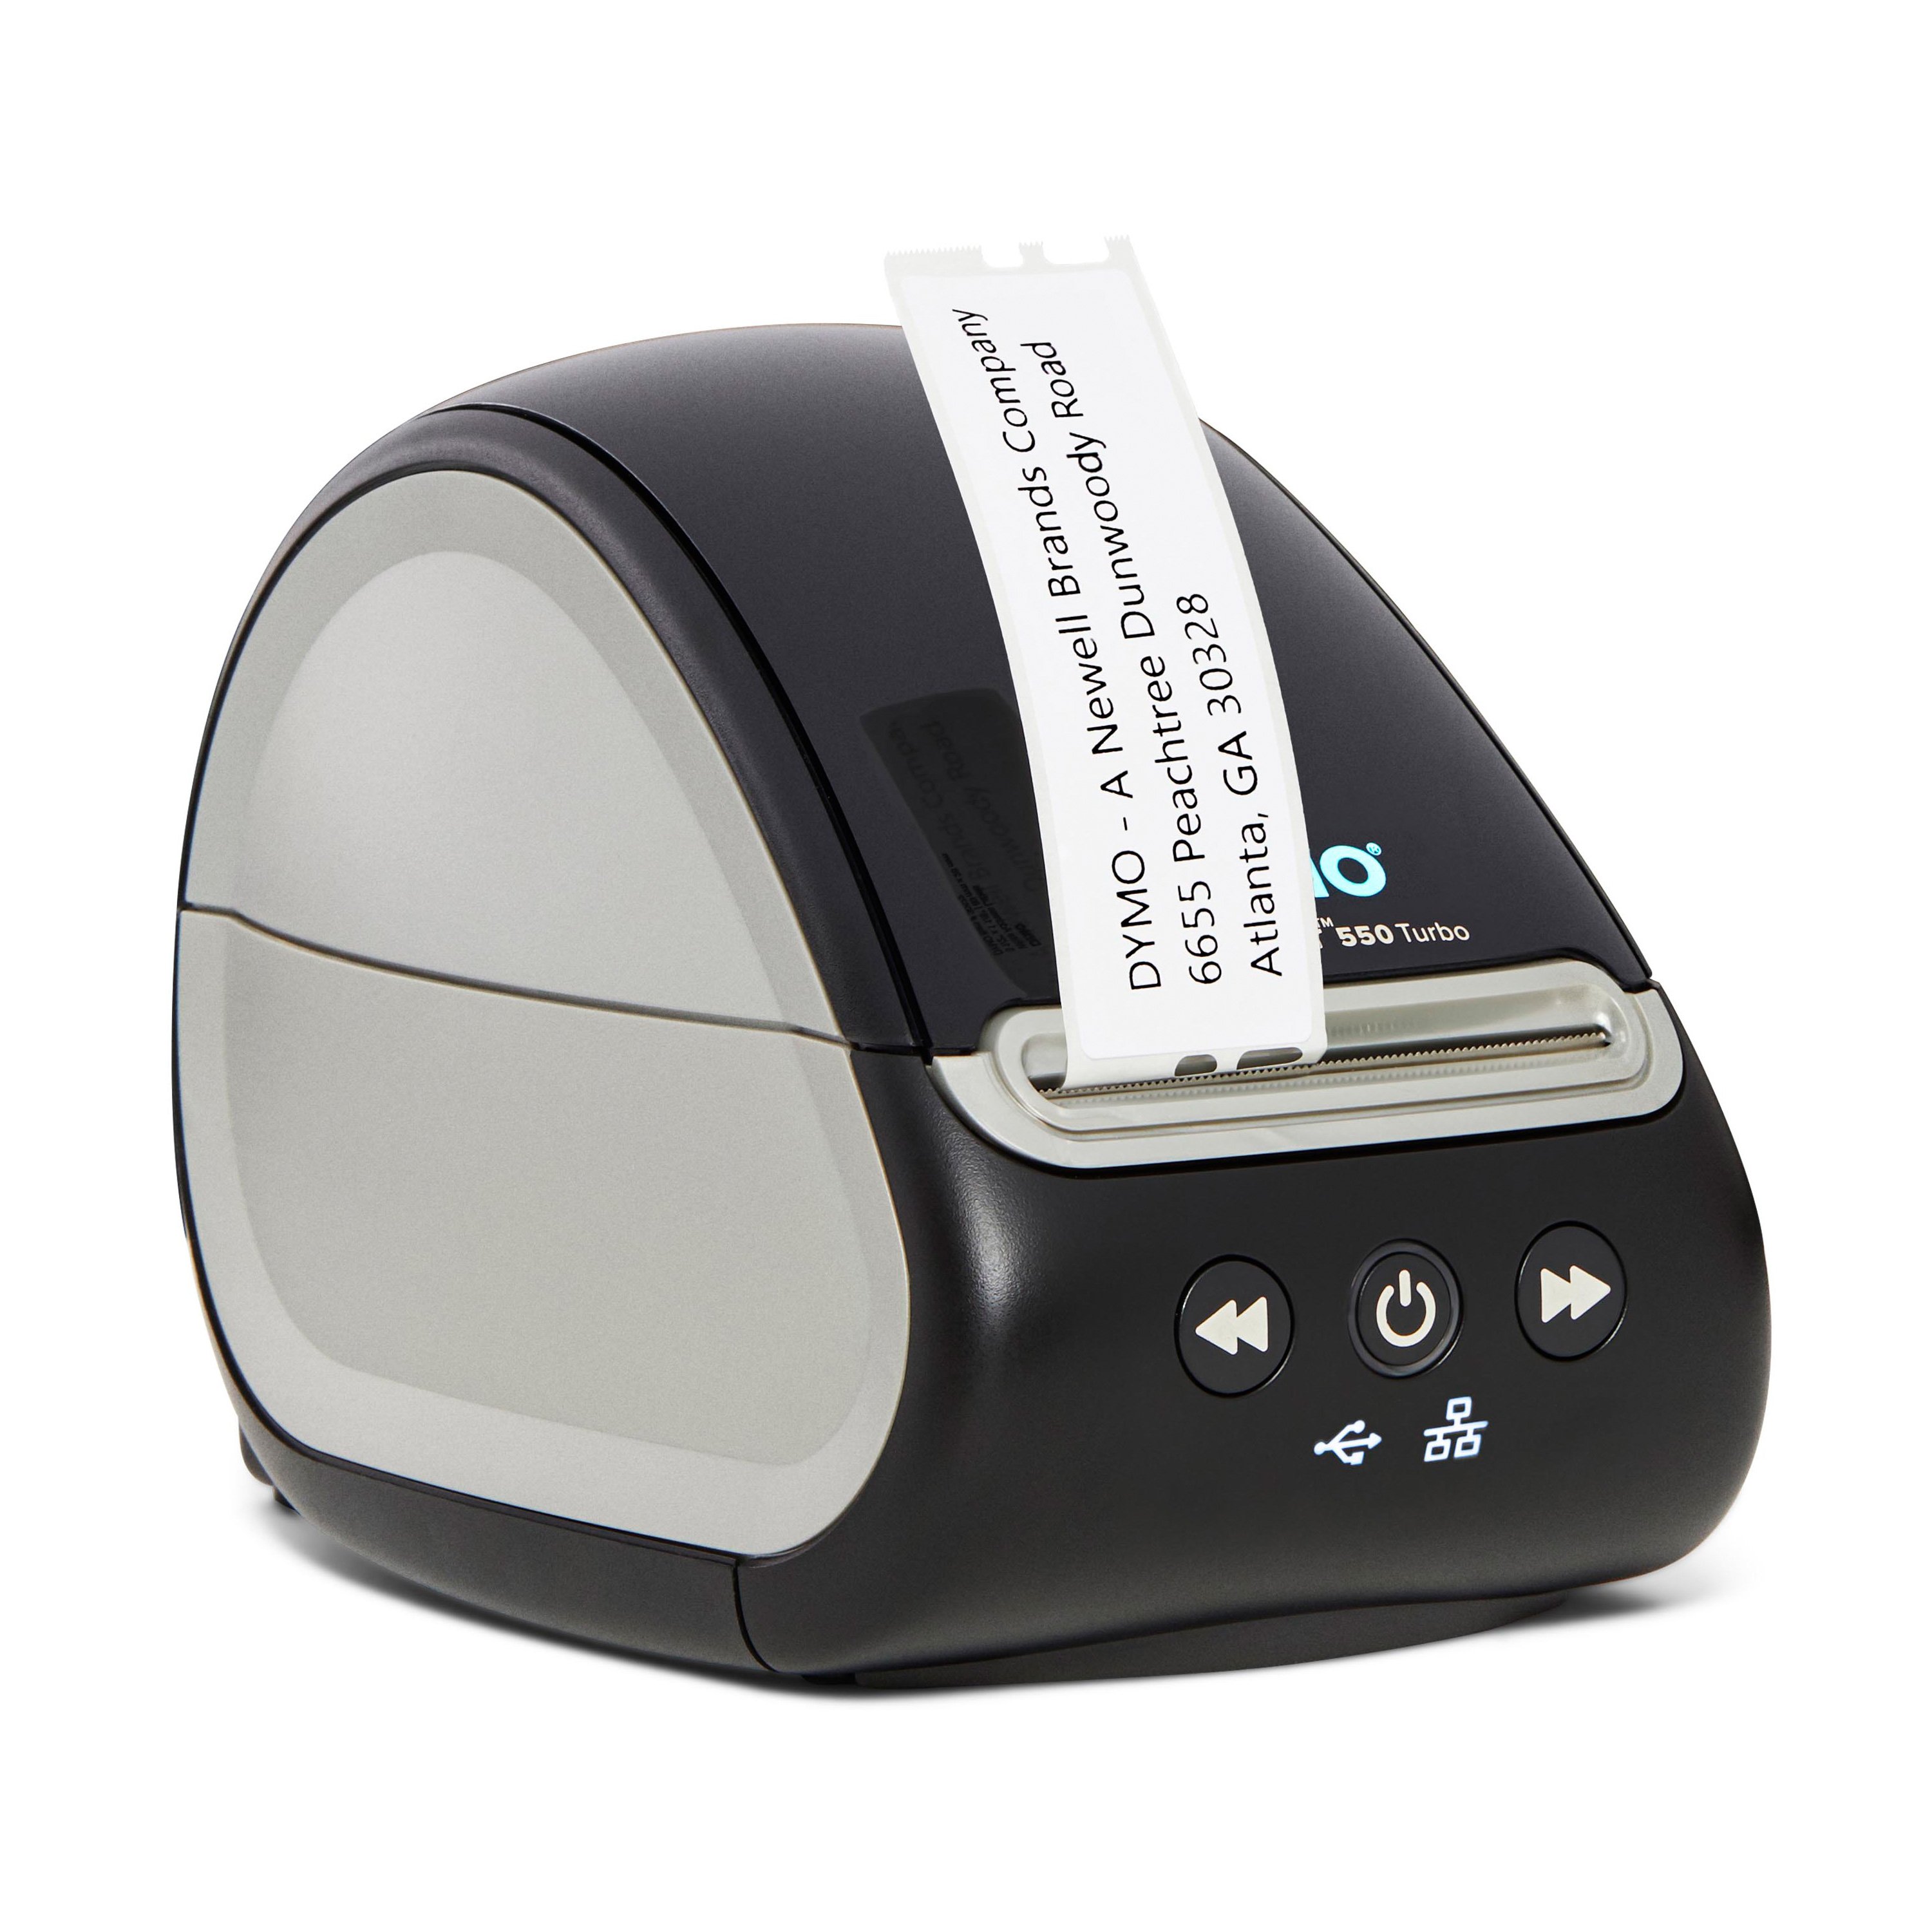 Dymo DYMO LabelWriter 550 Turbo Label PrinterLabel Maker with High-Speed Direct 